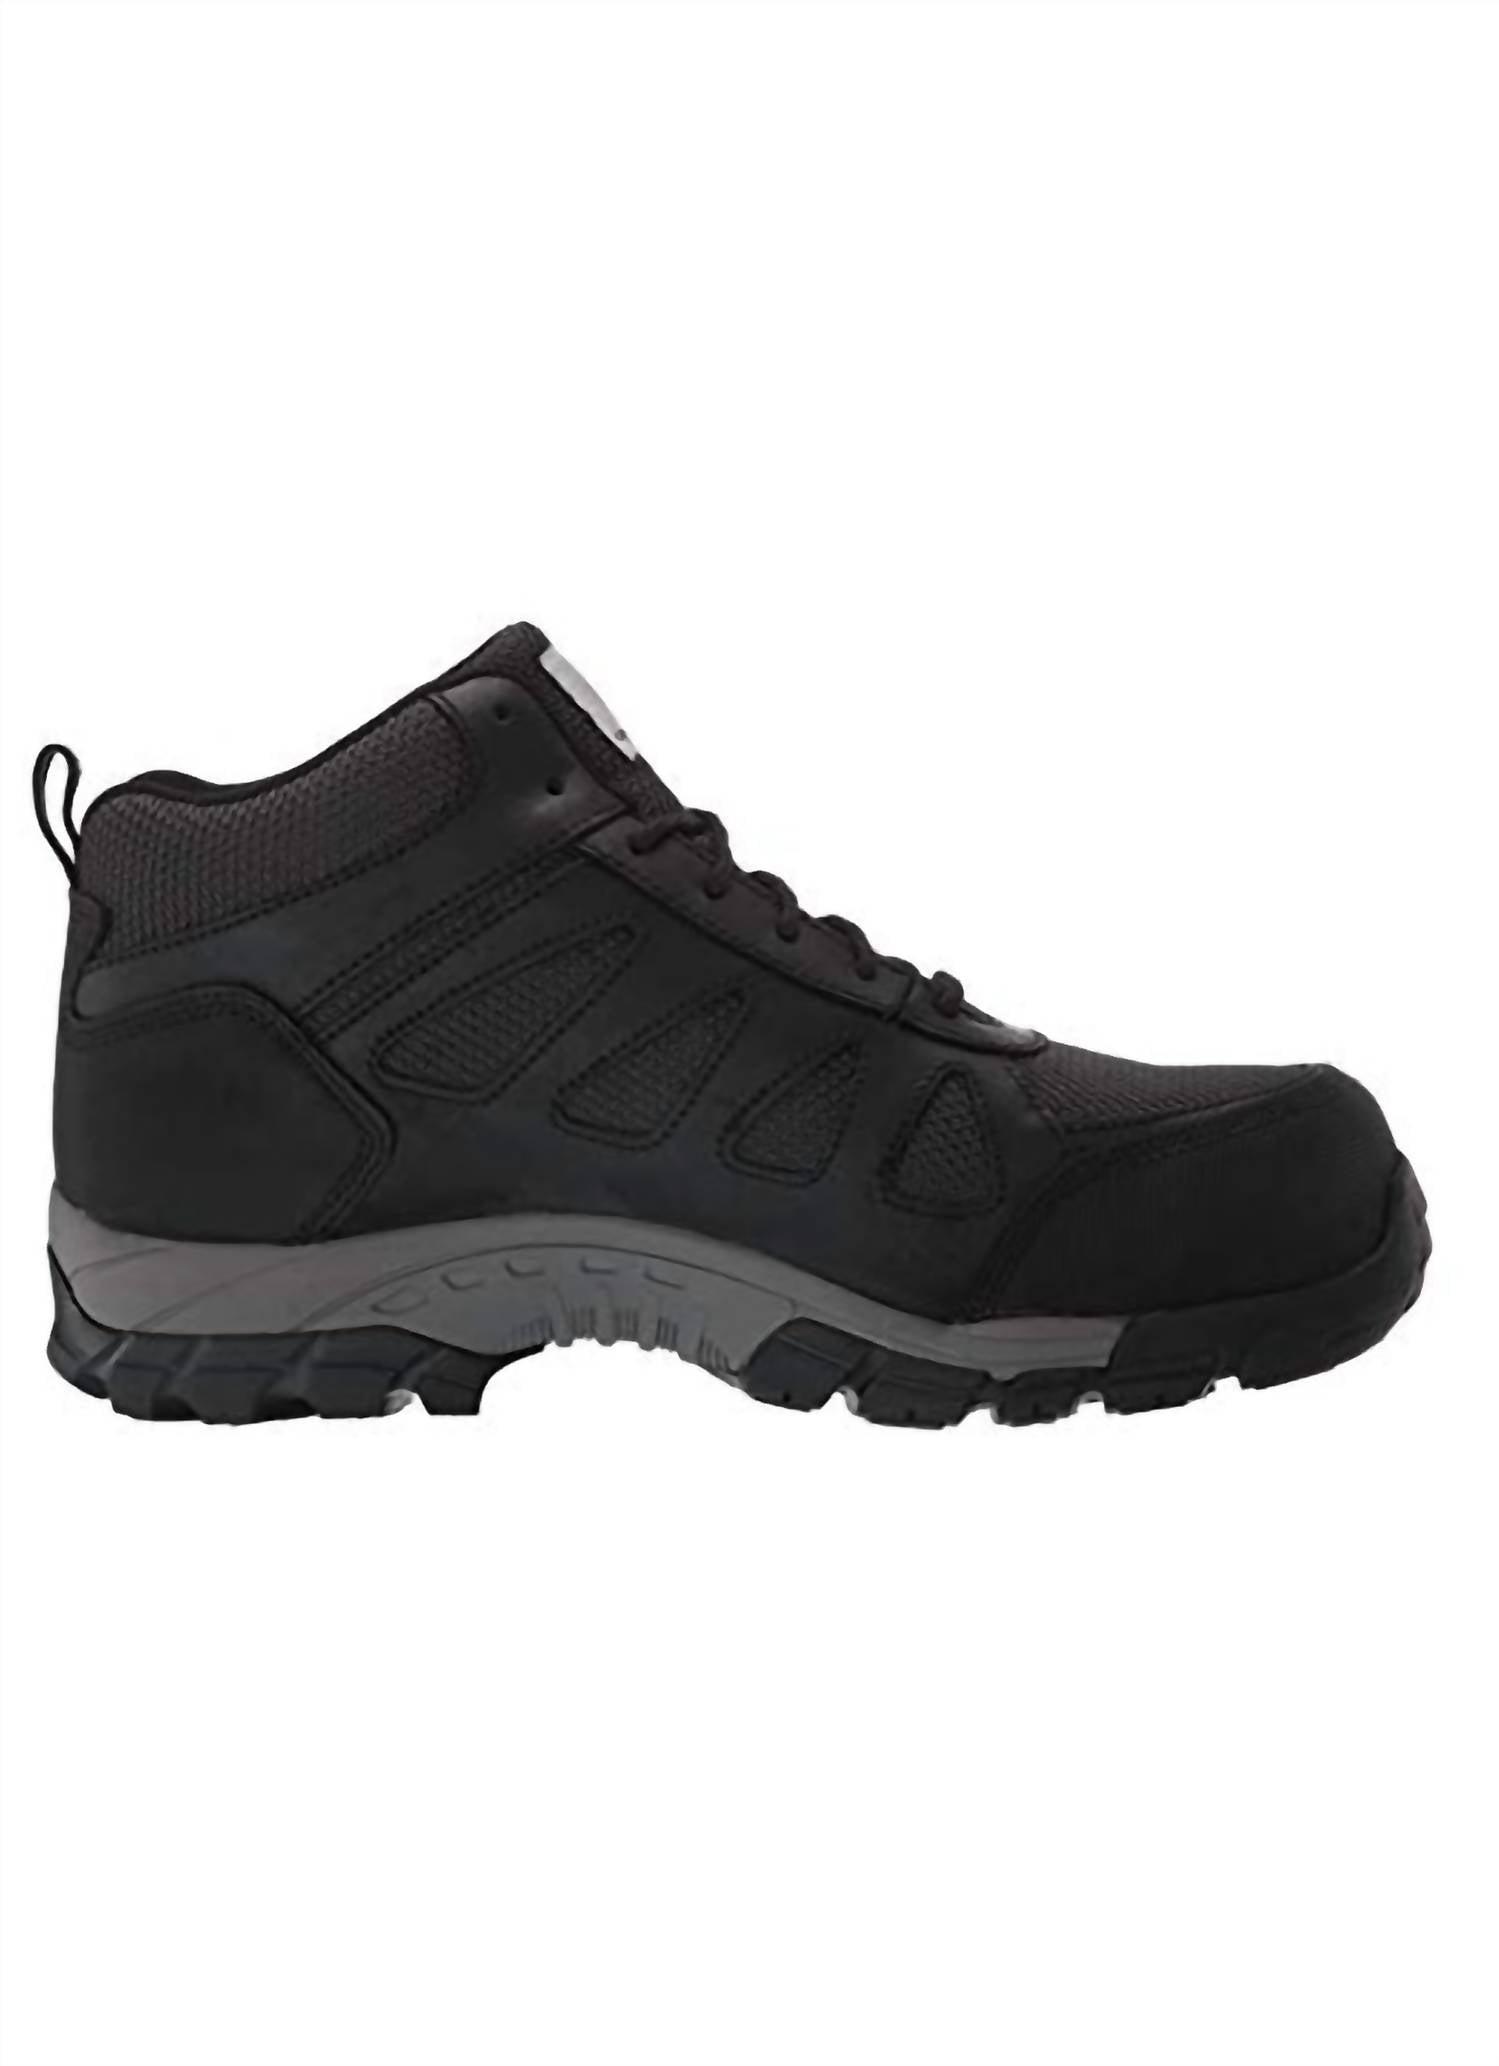 Steel Toe Shoes for Men Women Non Slip Waterproof Work Shoes Slip  Resisitant Lightweight Comfortable Breathable Safety Shoes Indestructible  Puncture Proof Construction Sneakers. Price: $45. Dm me USA testers for  details. :